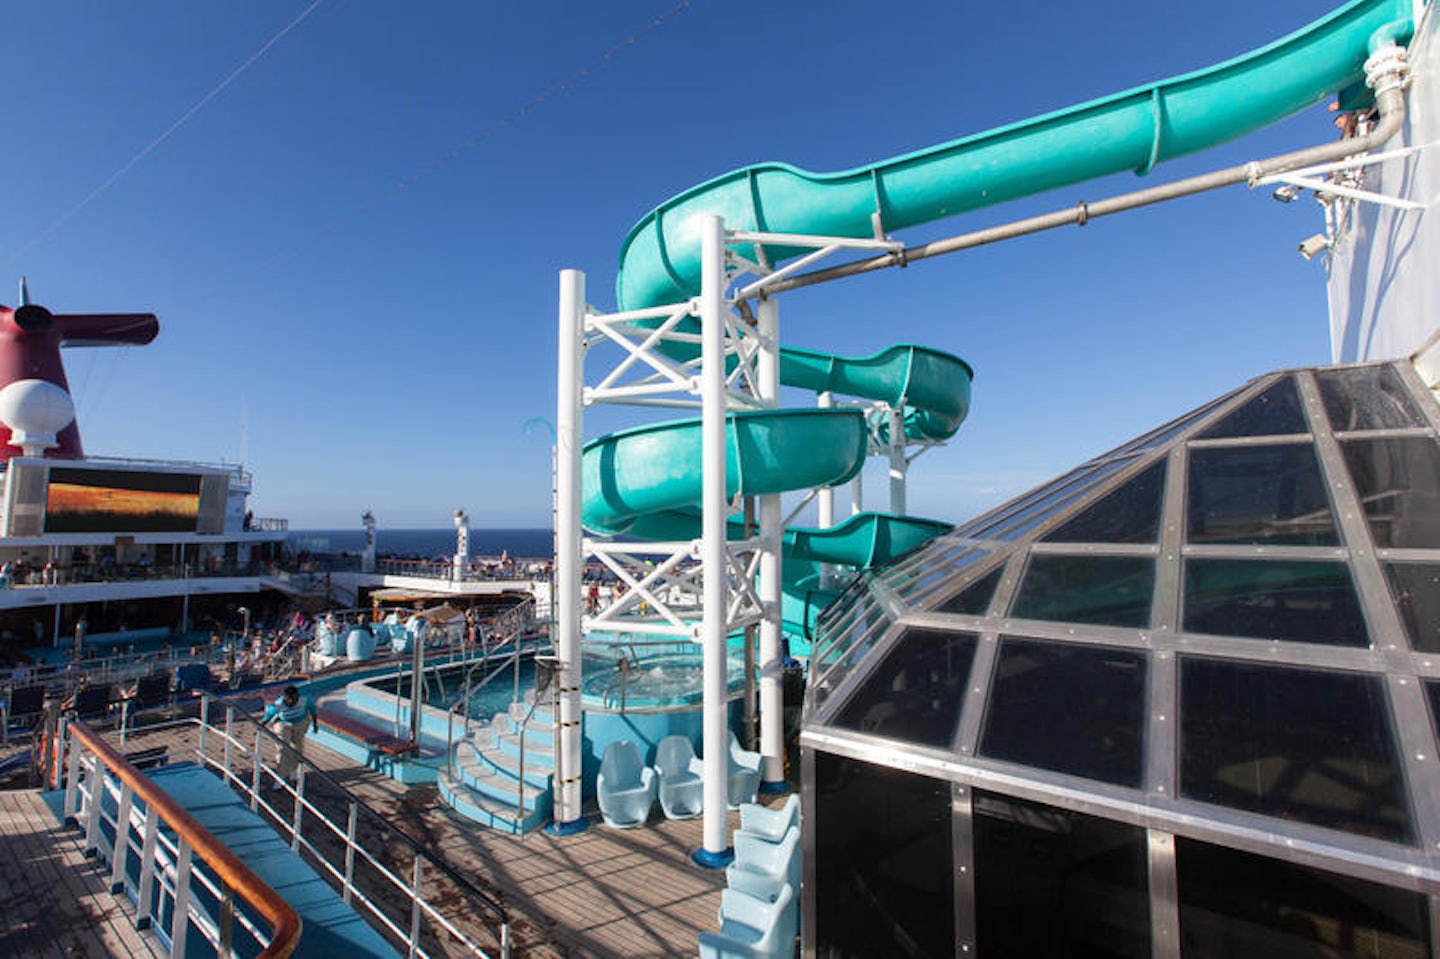 Waterslide on Carnival Conquest